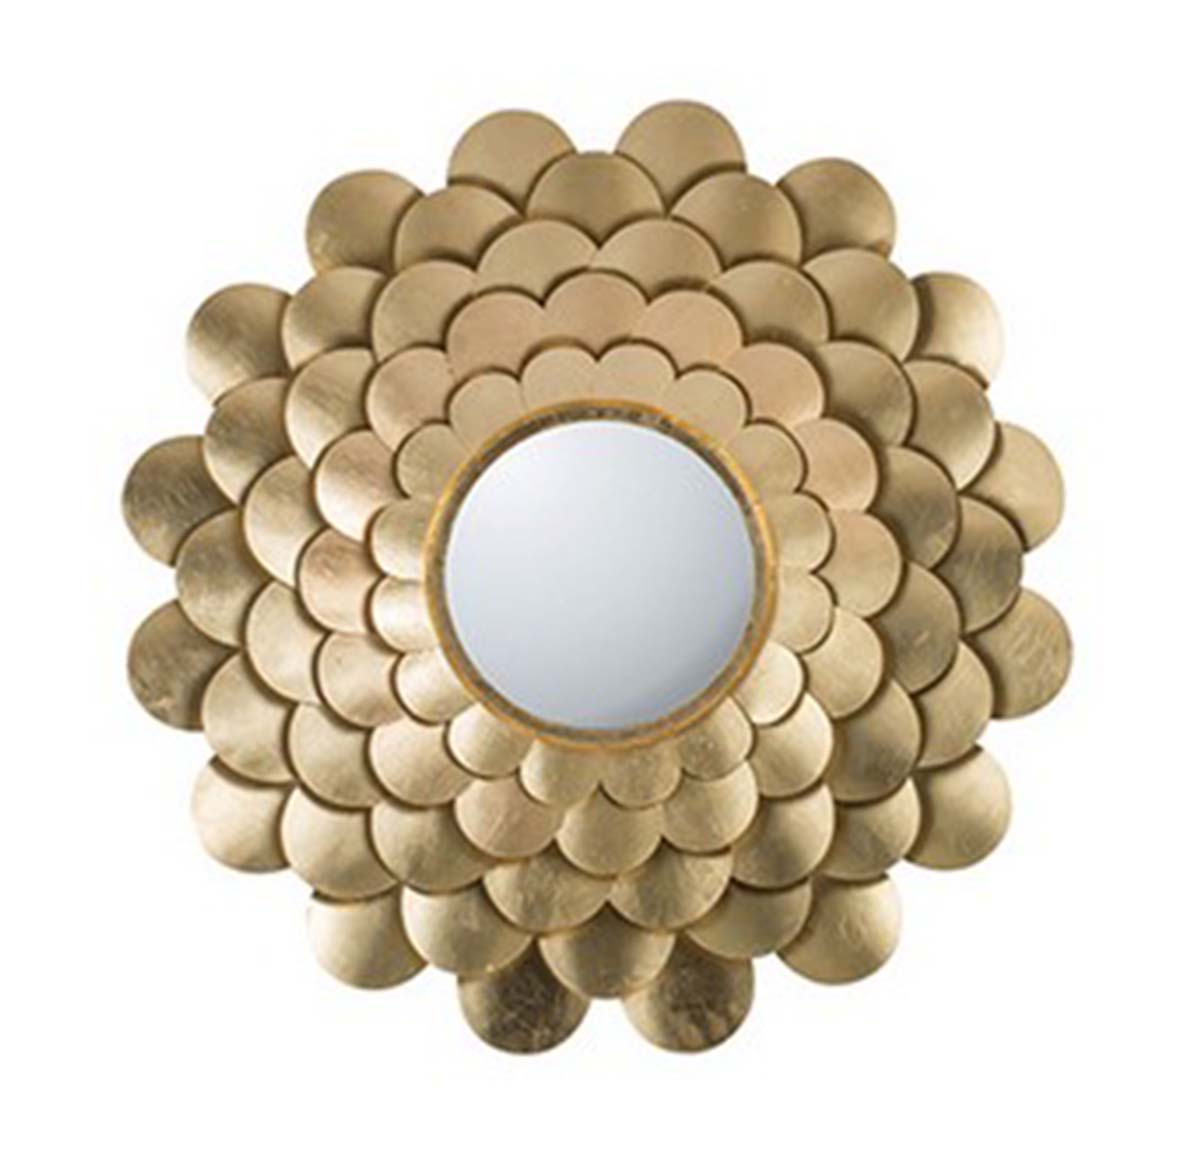 Floral Petals Round Wall Hanging Mirror - Gold | Home Decor